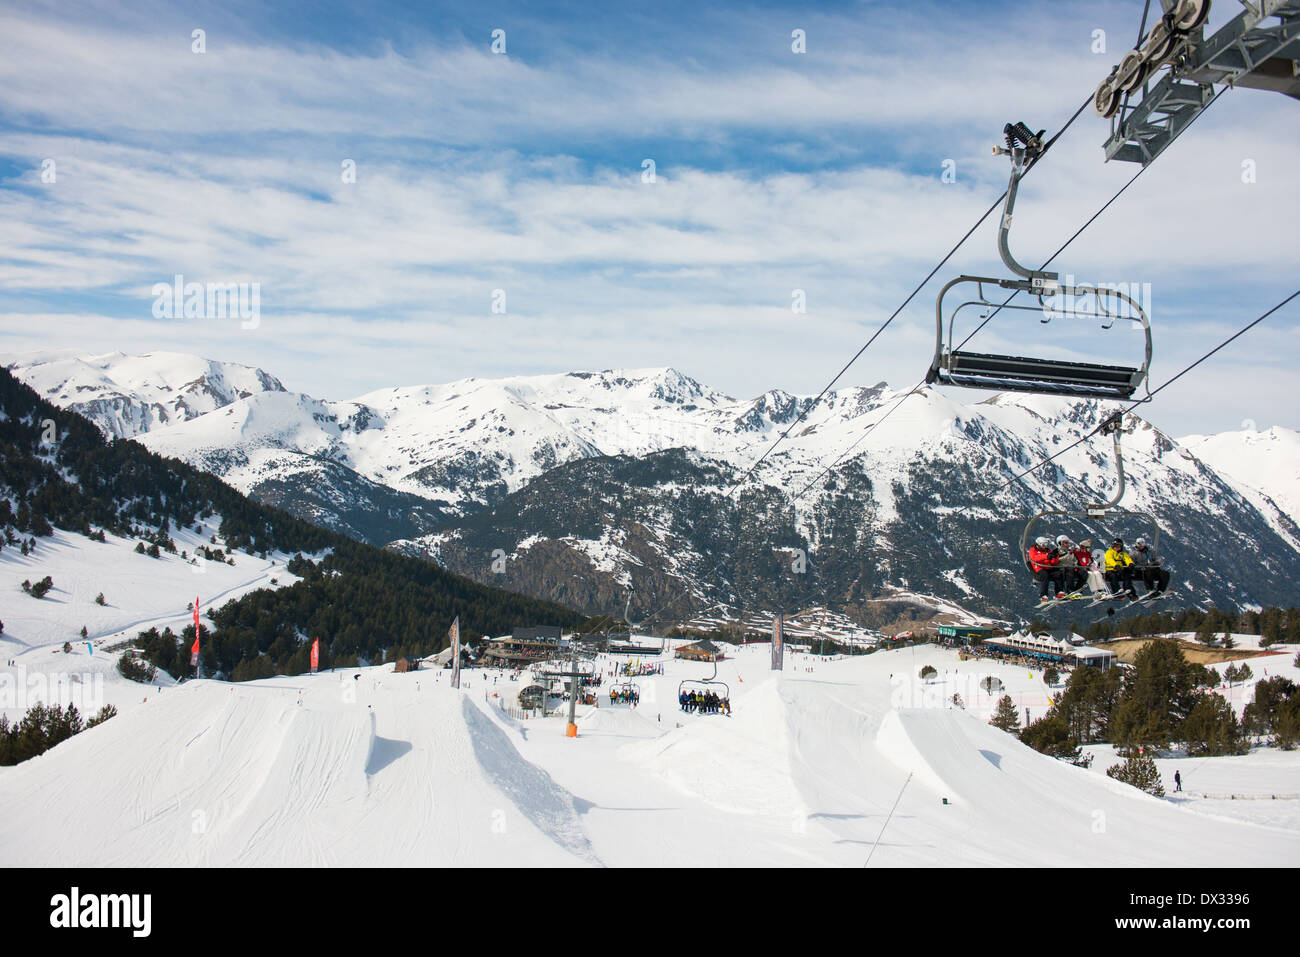 Chair lifts in Soldeu, Andorra winter sports resort. Skiers sitting on a chair lift hovering over the slope style free ski area of Soldeu in the sun. Stock Photo